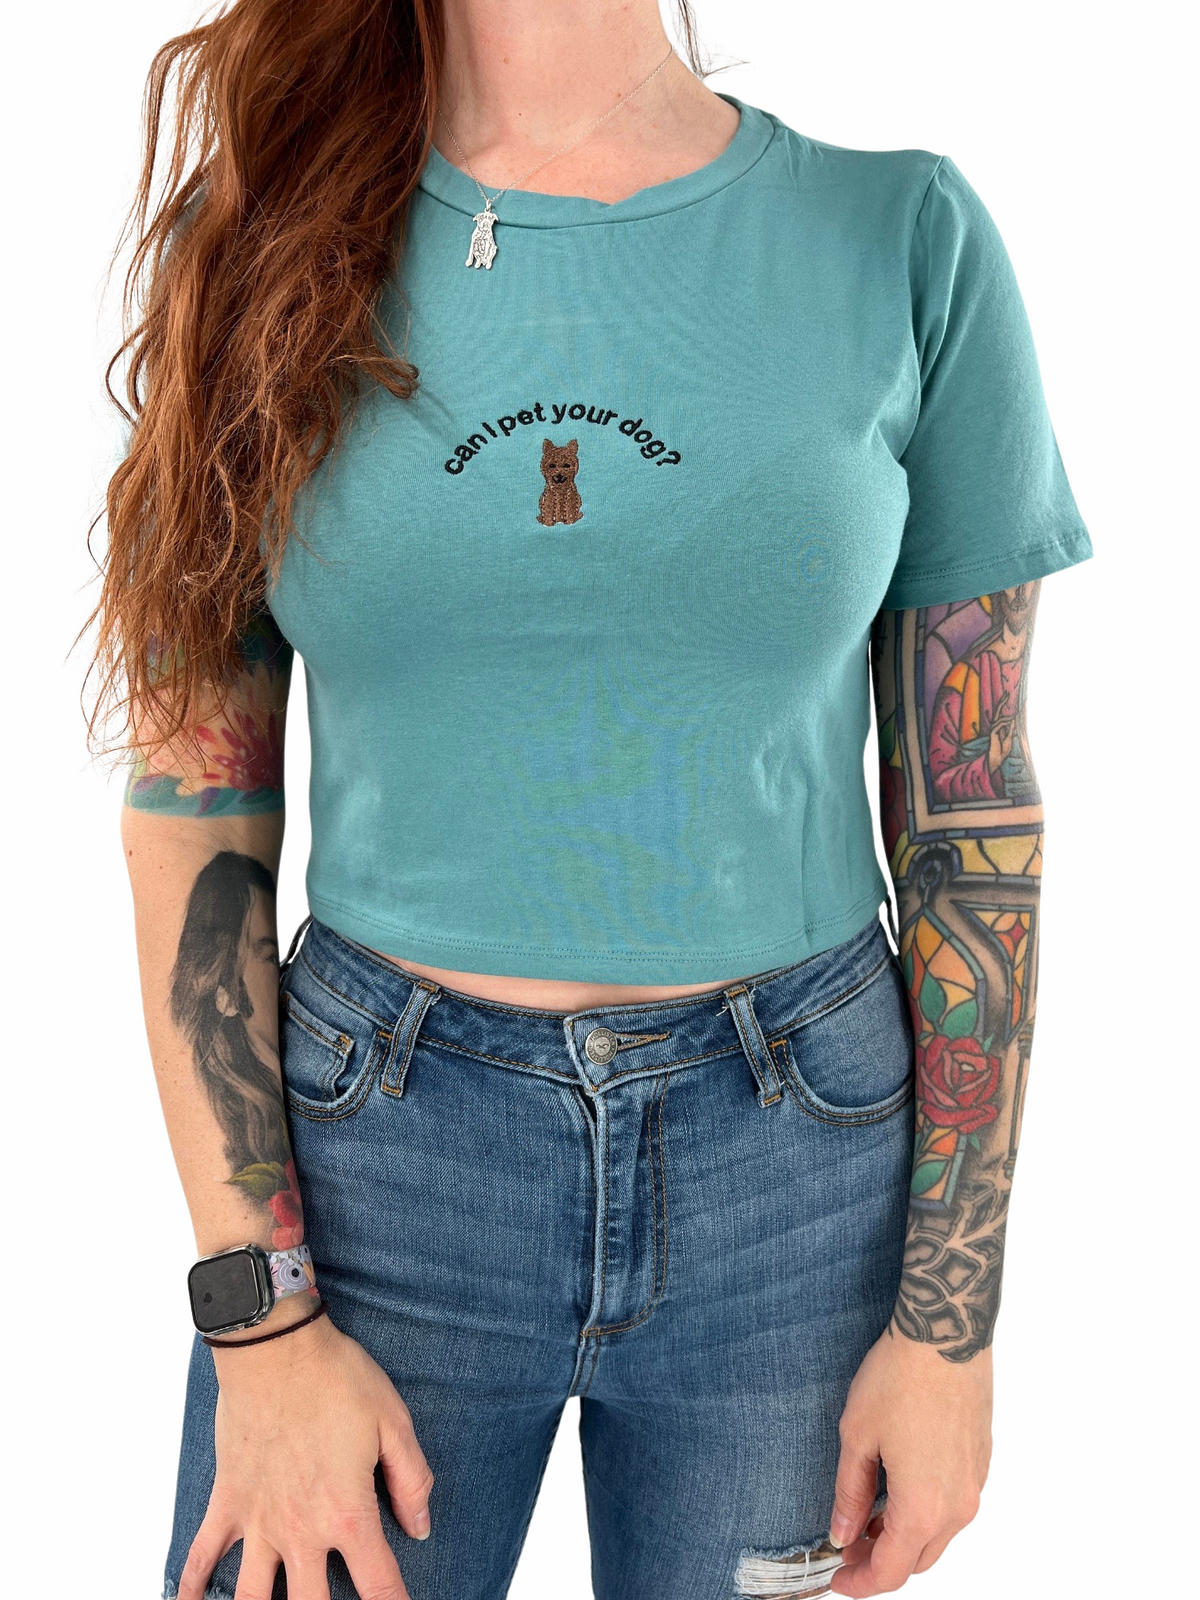 Can I Pet Your Dog? Embroidered Crop Top